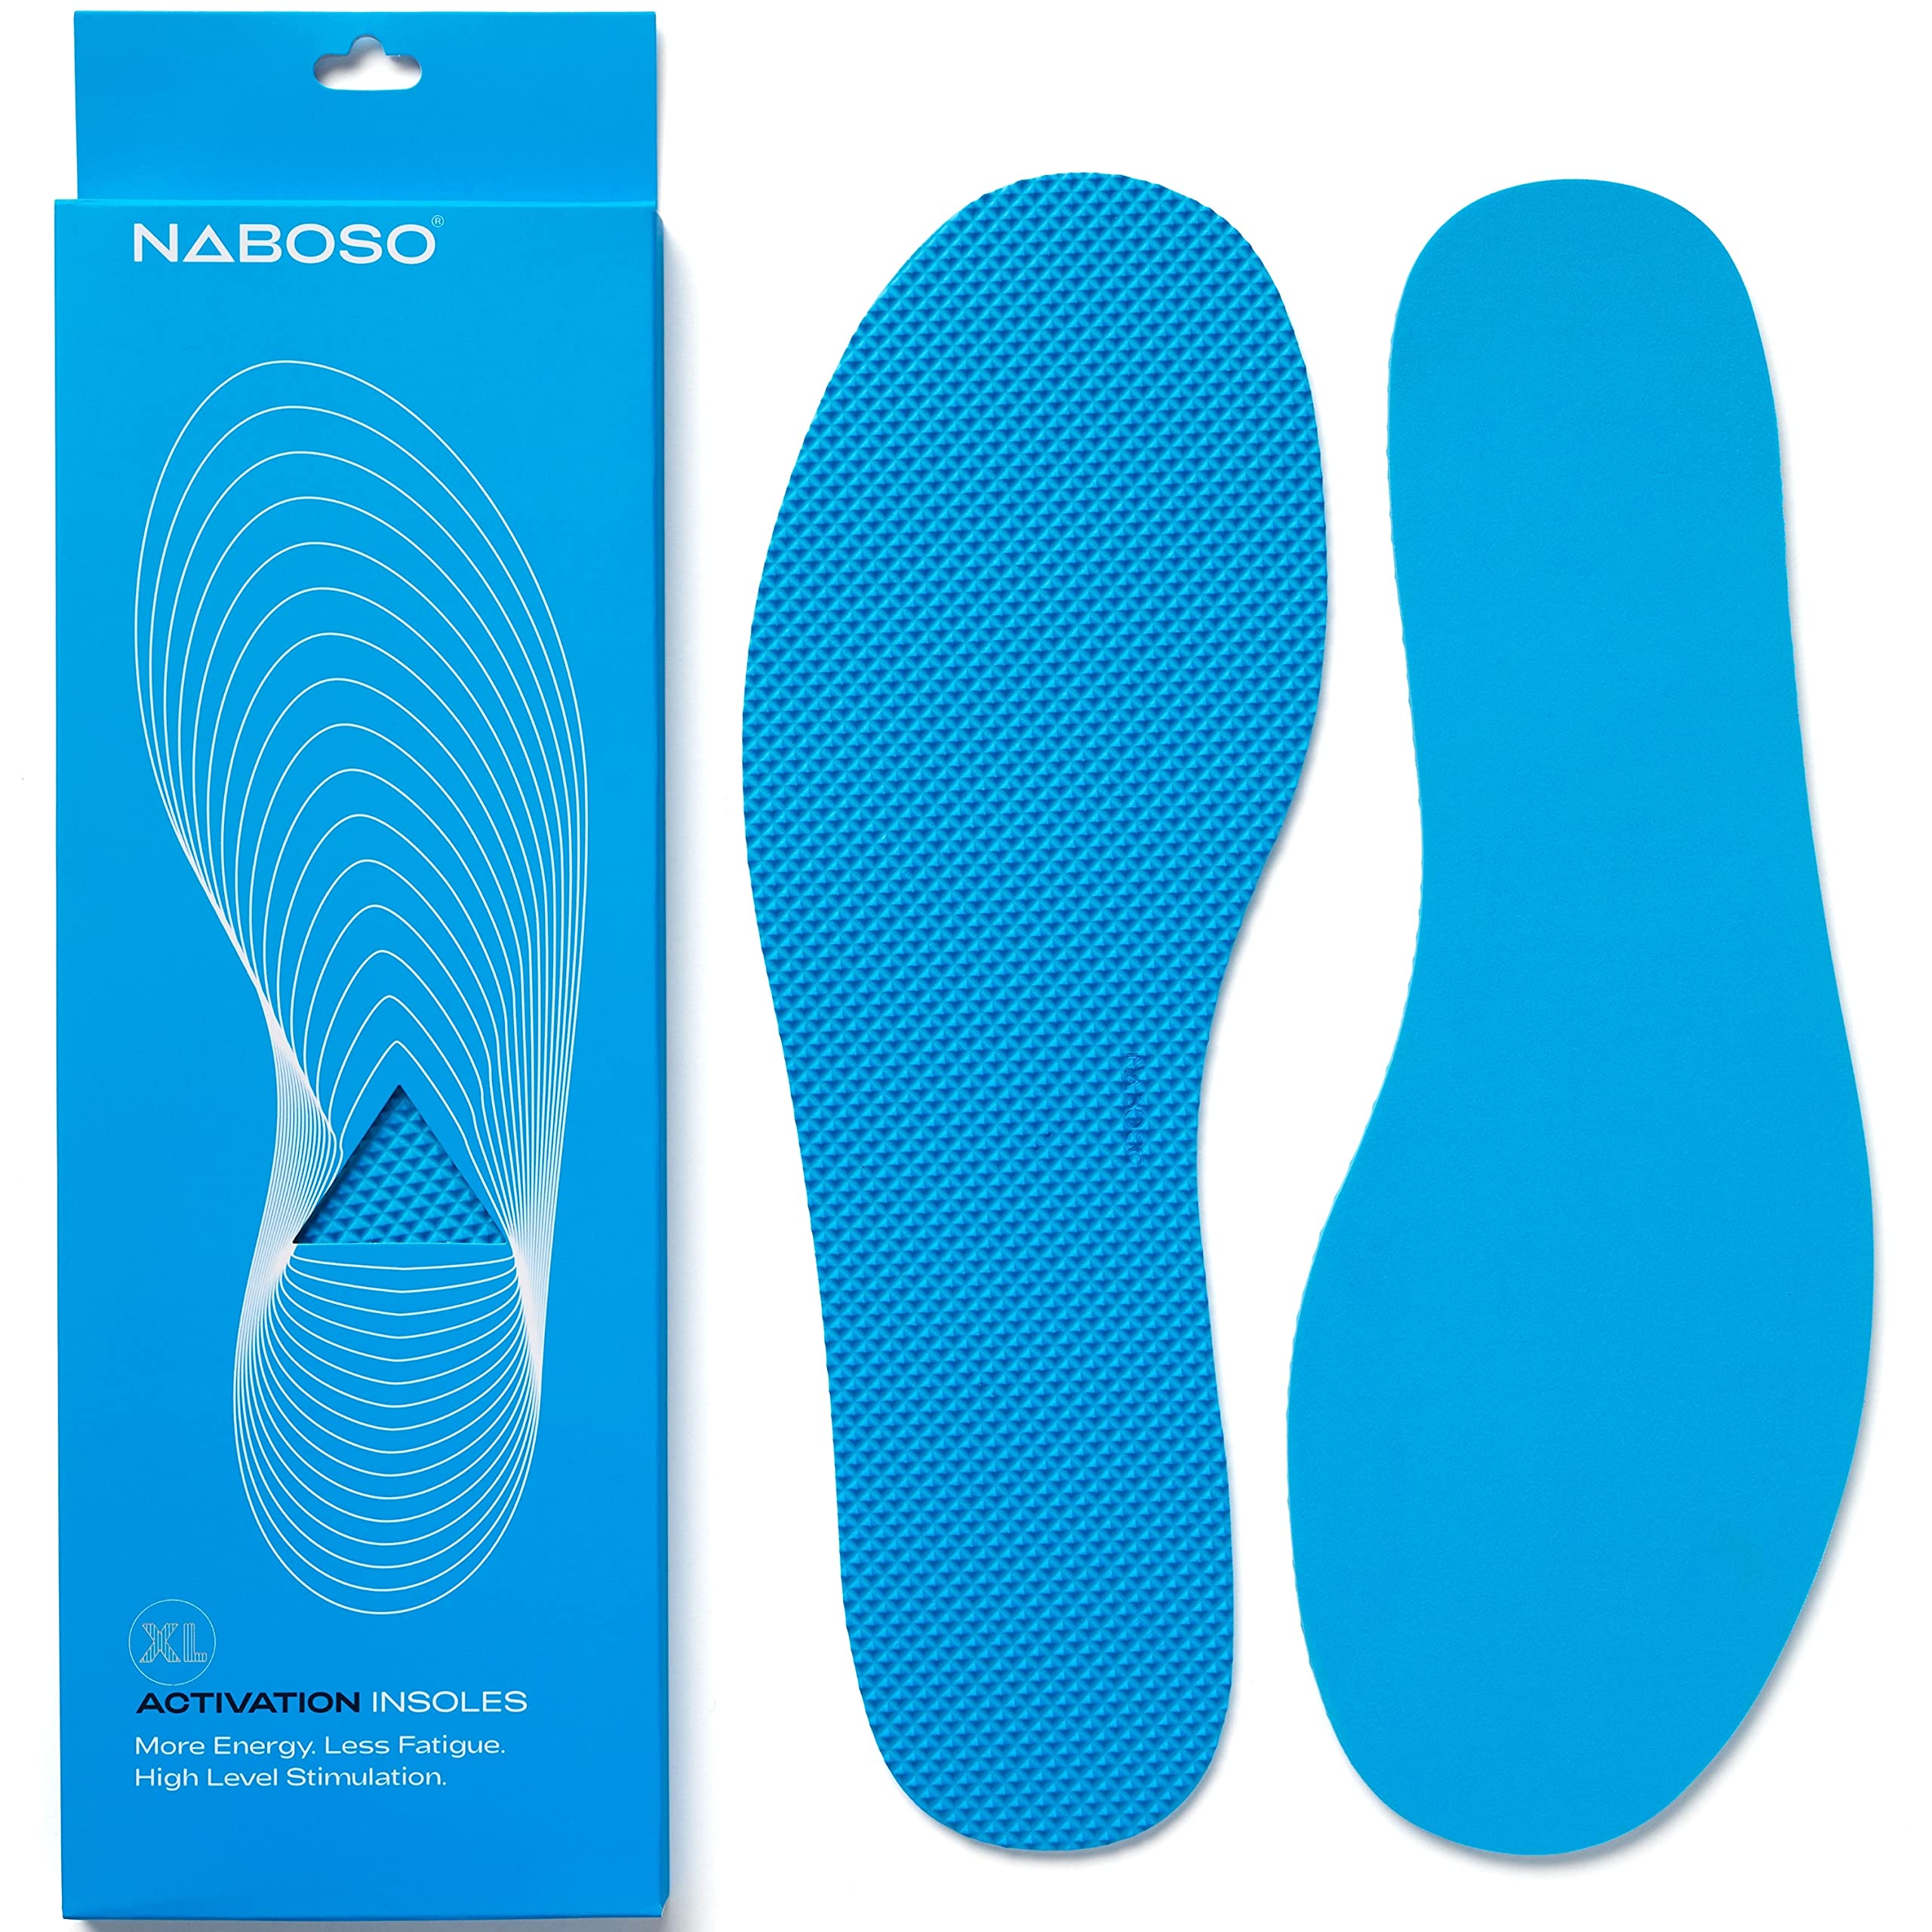 Naboso Activation Sensory Insole, Thin Men's and Women's Textured Anti-Fatigue Shoe Inserts That Best Stimulate The Feet to Improve Posture...